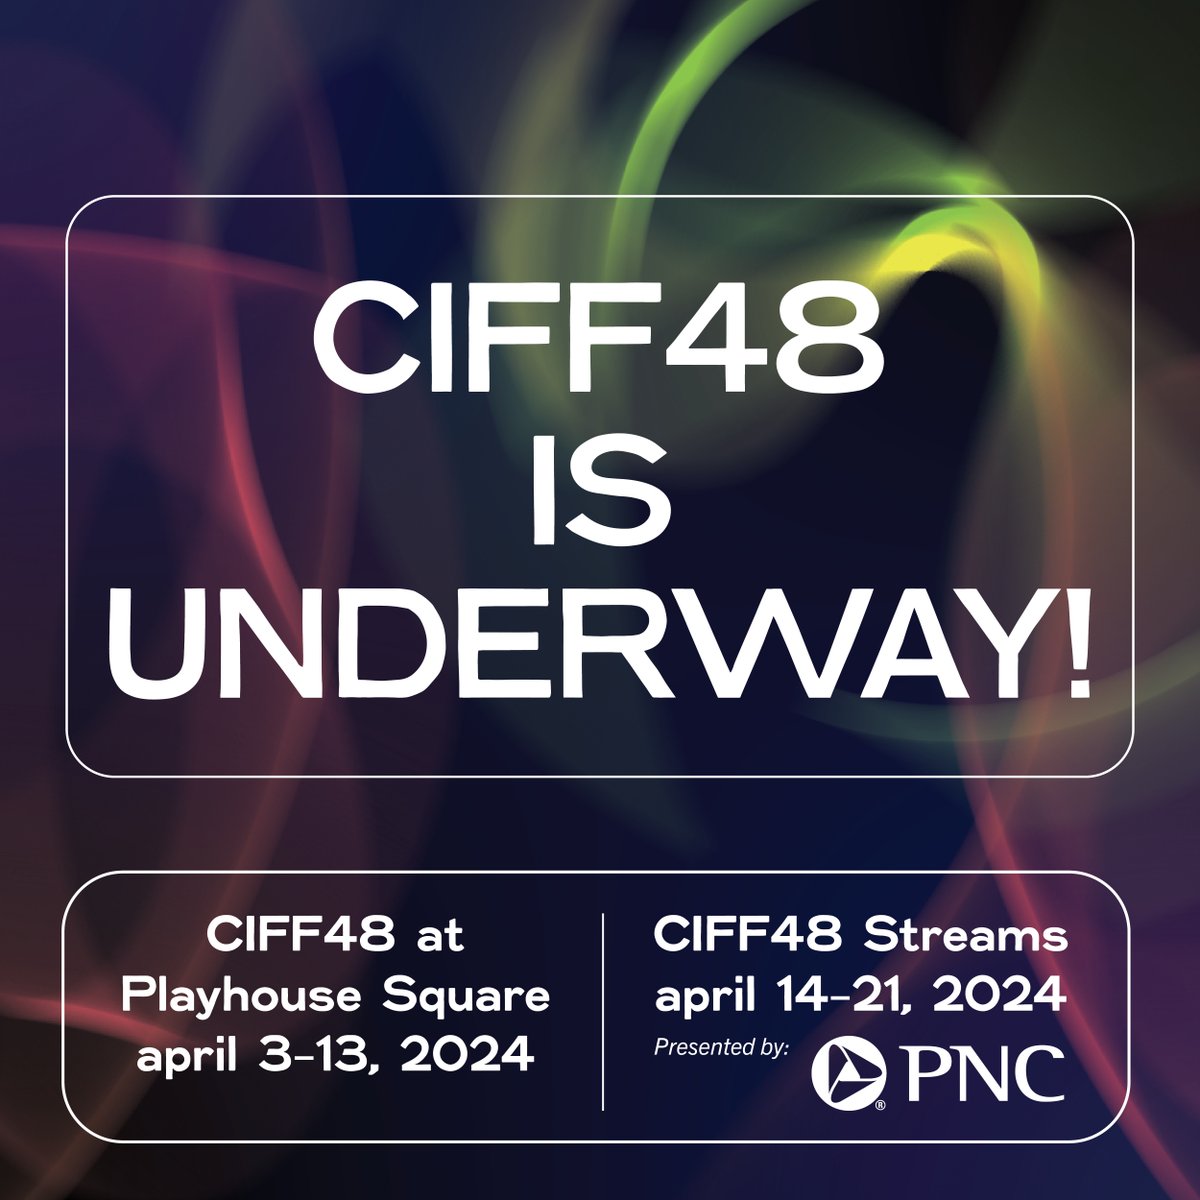 The 48th @CIFF is officially underway through April 13th at @PlayhouseSquare! Join us for our partnered film, What's Next, on 4/7 at 2:20 p.m. & 4/9 at 2:25 p.m. Even better? Use discount code ROSE to receive $1 off your ticket purchases! bit.ly/4c9JOFw #CIFF48